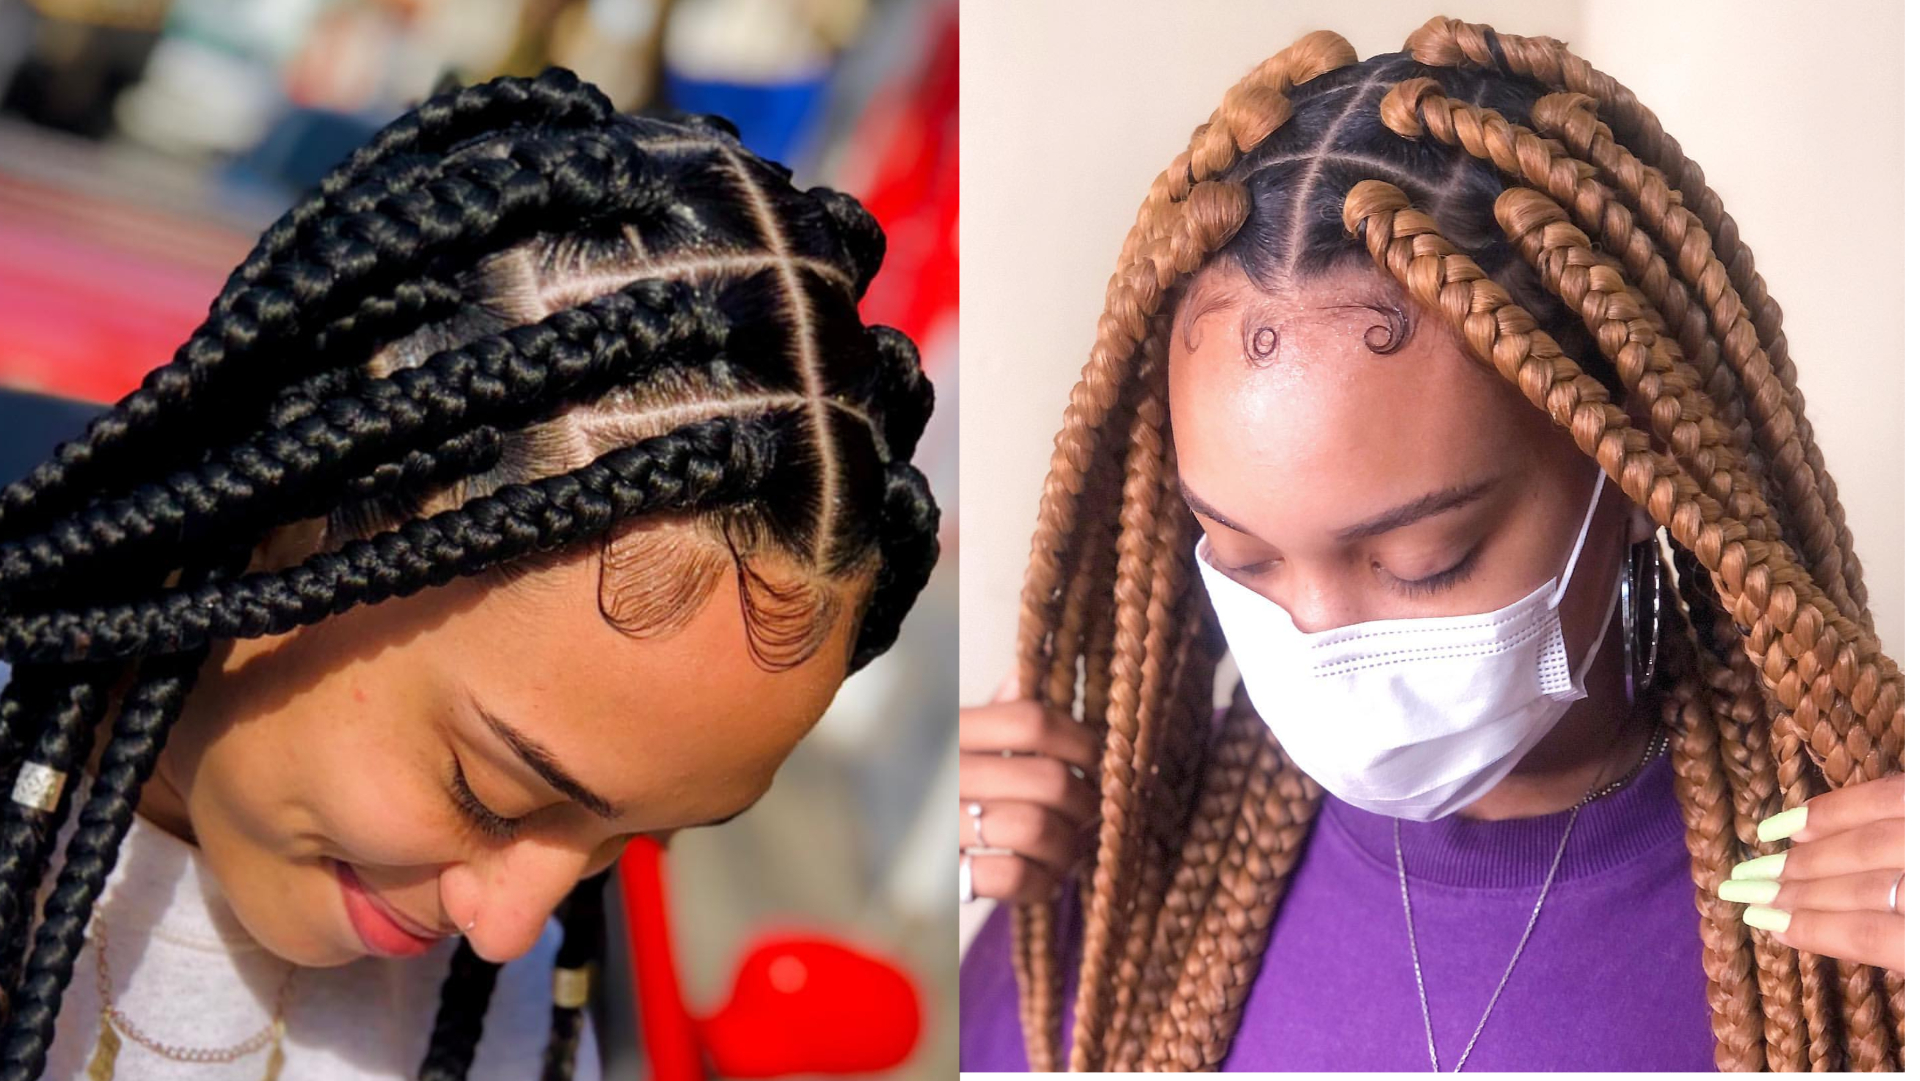 DIY Braiding How to Braid Your Own Hair at Home - Unleash Your Inner Stylist